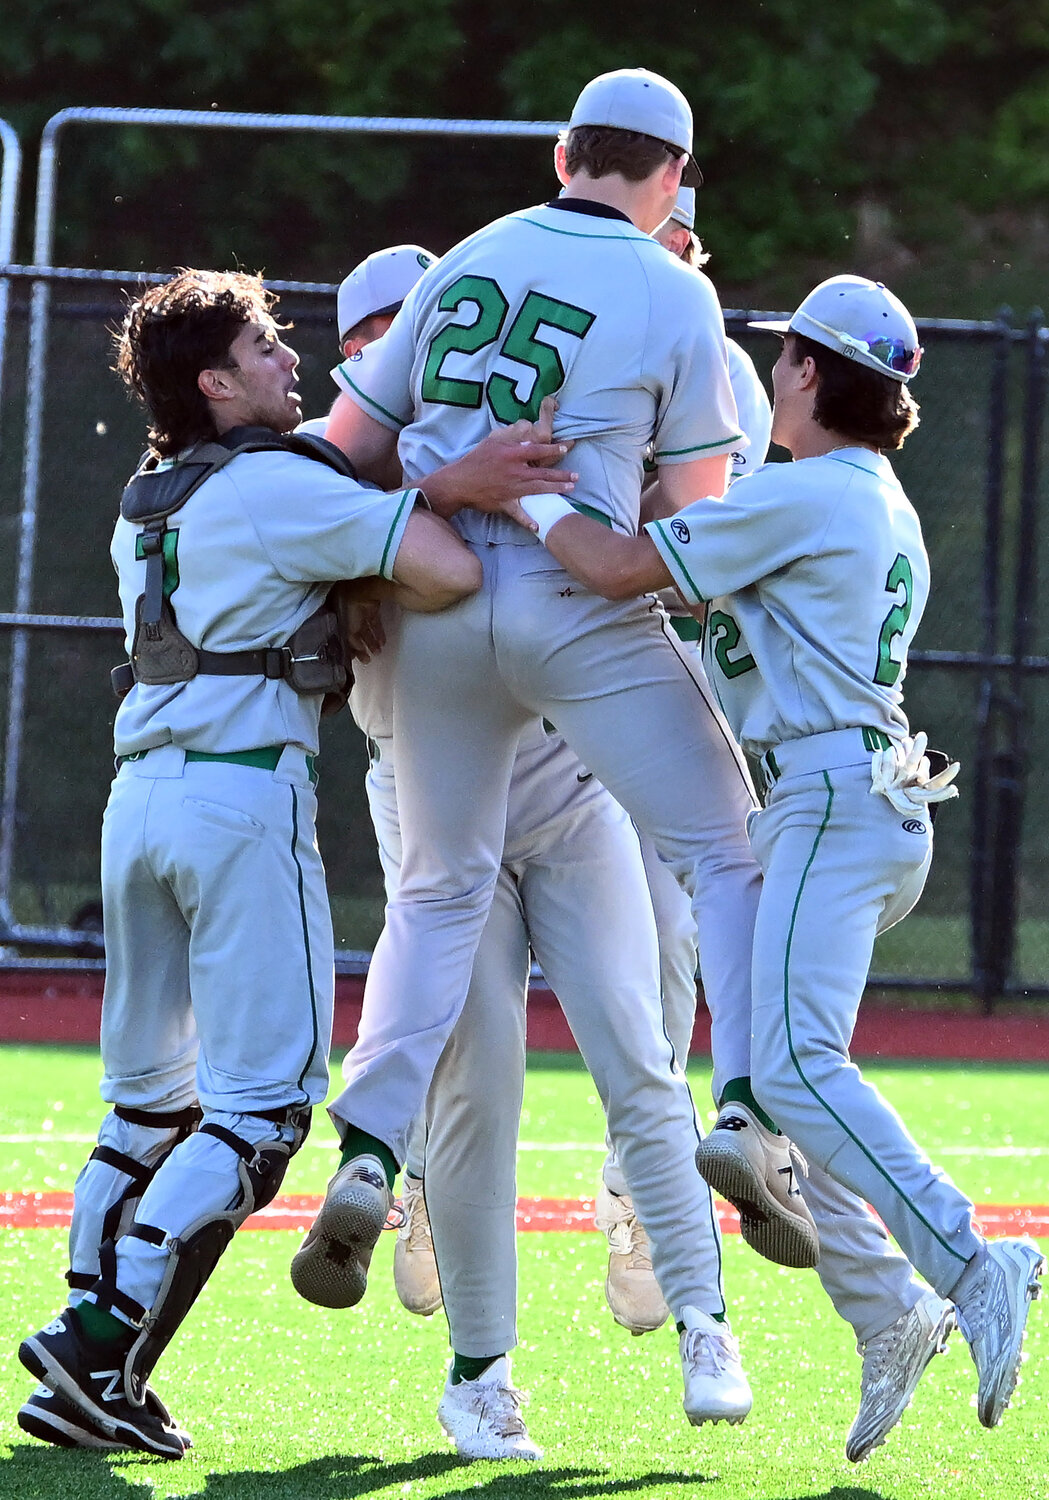 Seaford celebrated its first-ever county baseball championship last Friday after it blanked Wheatley, 1-0, in Game 2 of the Class B finals.